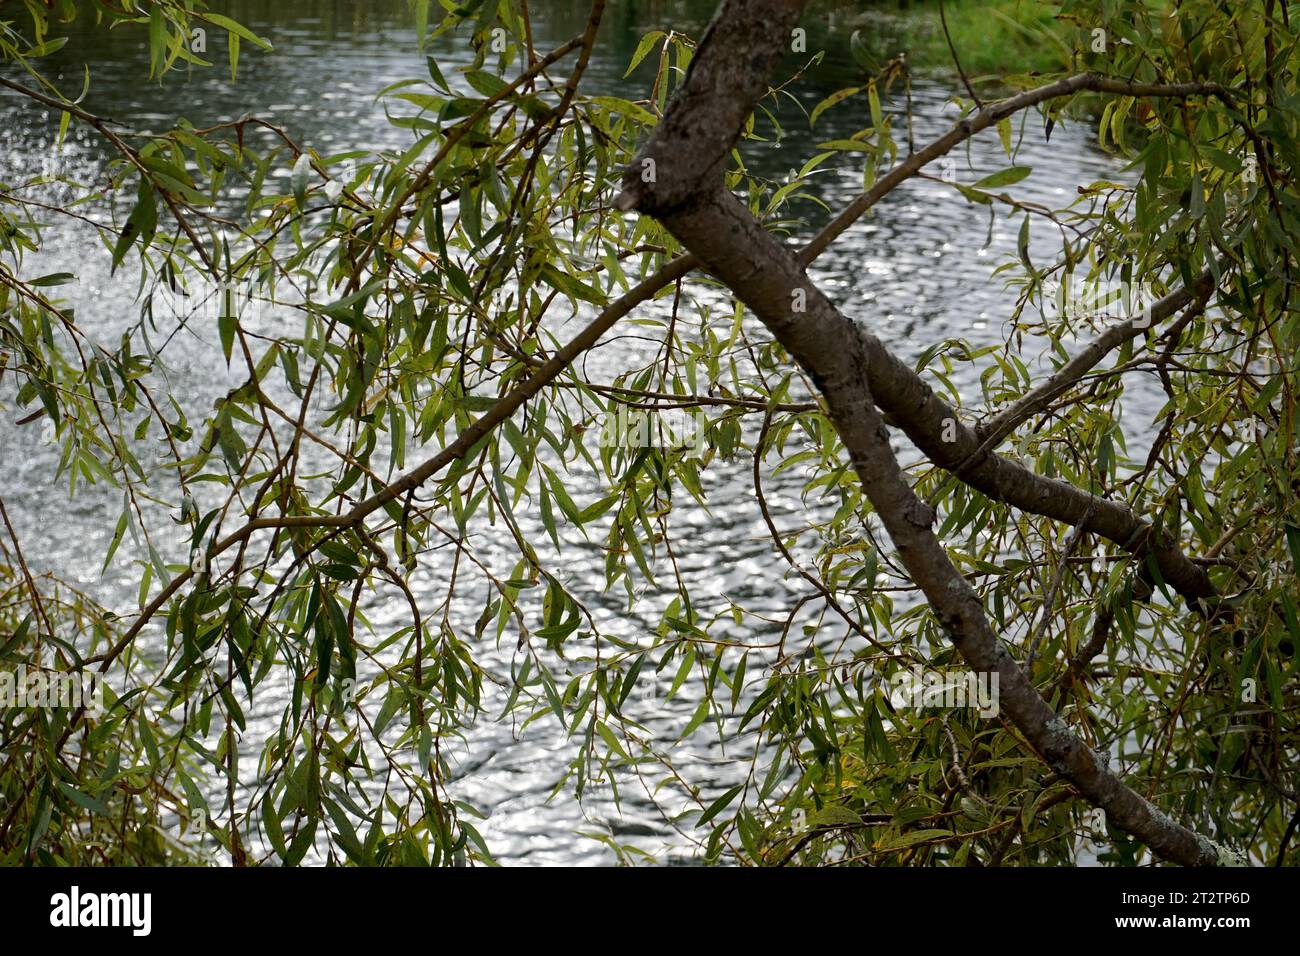 Willow tree overhanging water Stock Photo